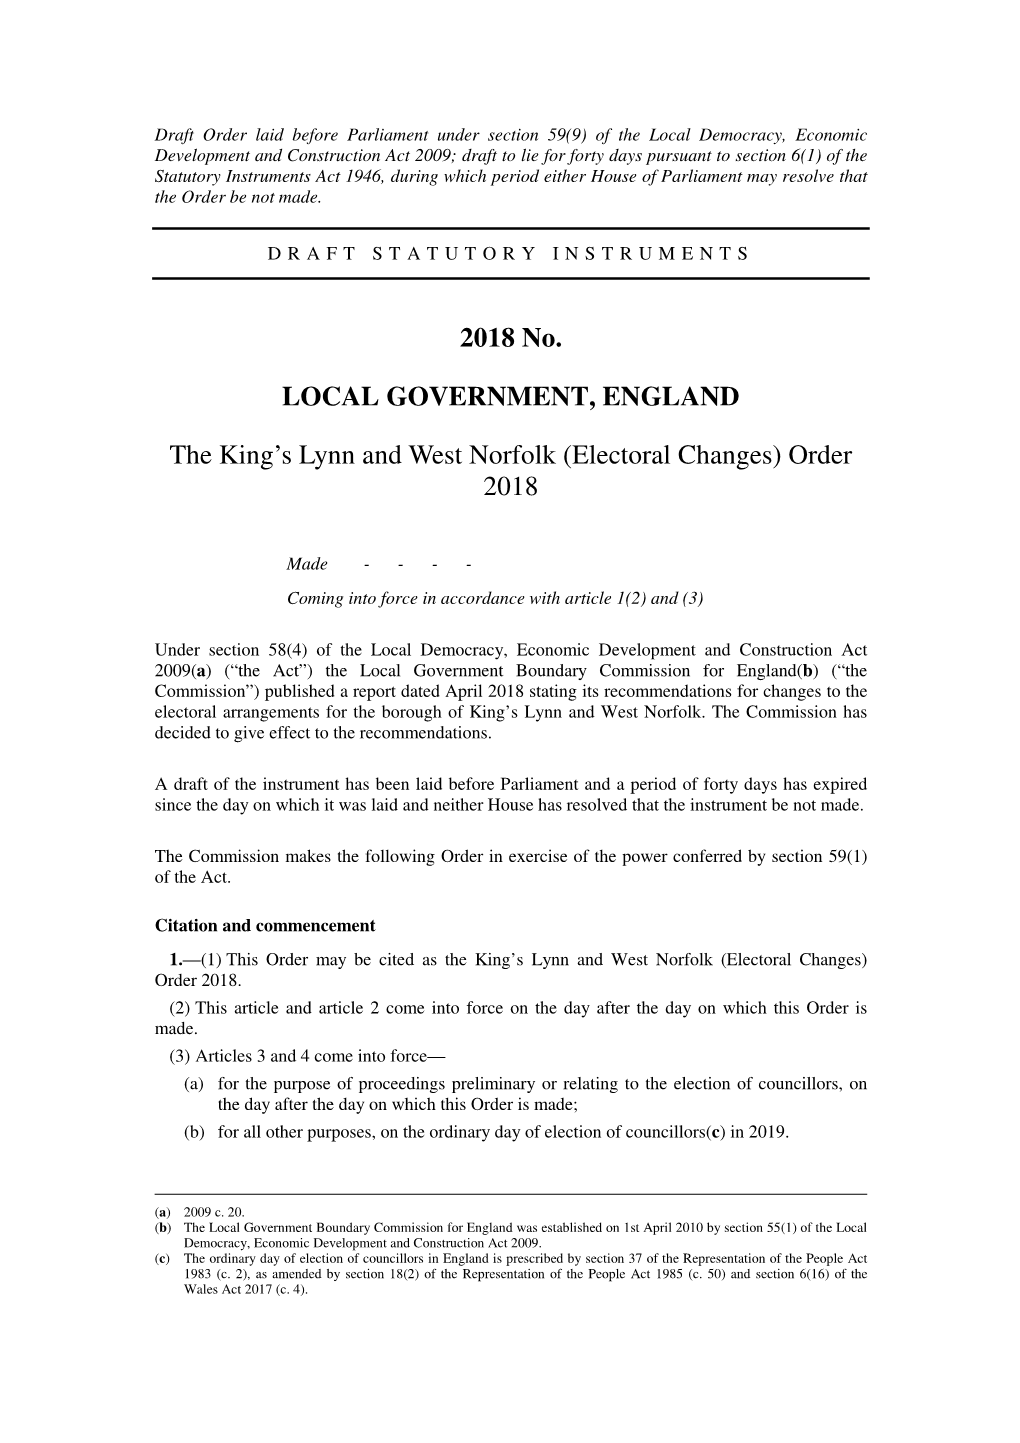 The King's Lynn and West Norfolk (Electoral Changes) Order 2018